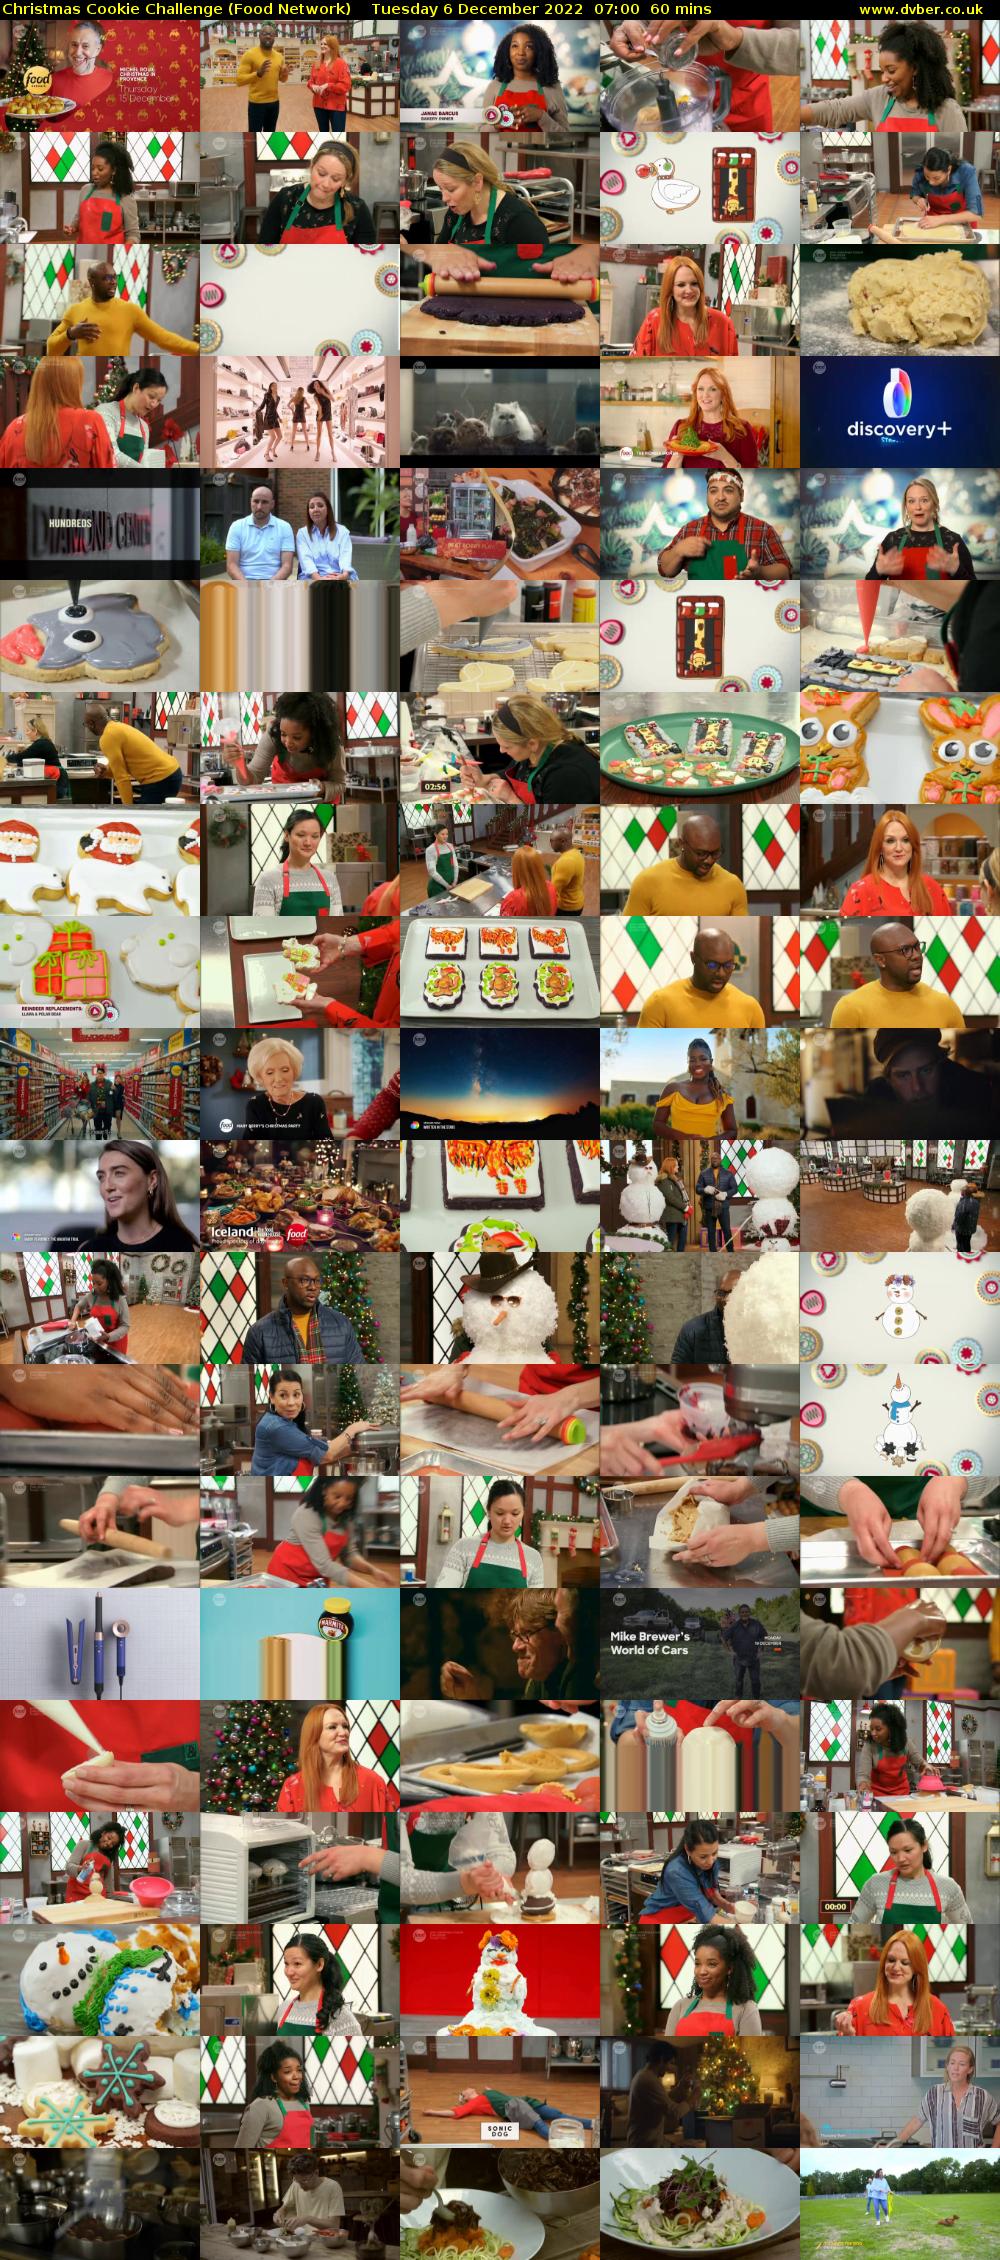 Christmas Cookie Challenge (Food Network) Tuesday 6 December 2022 07:00 - 08:00